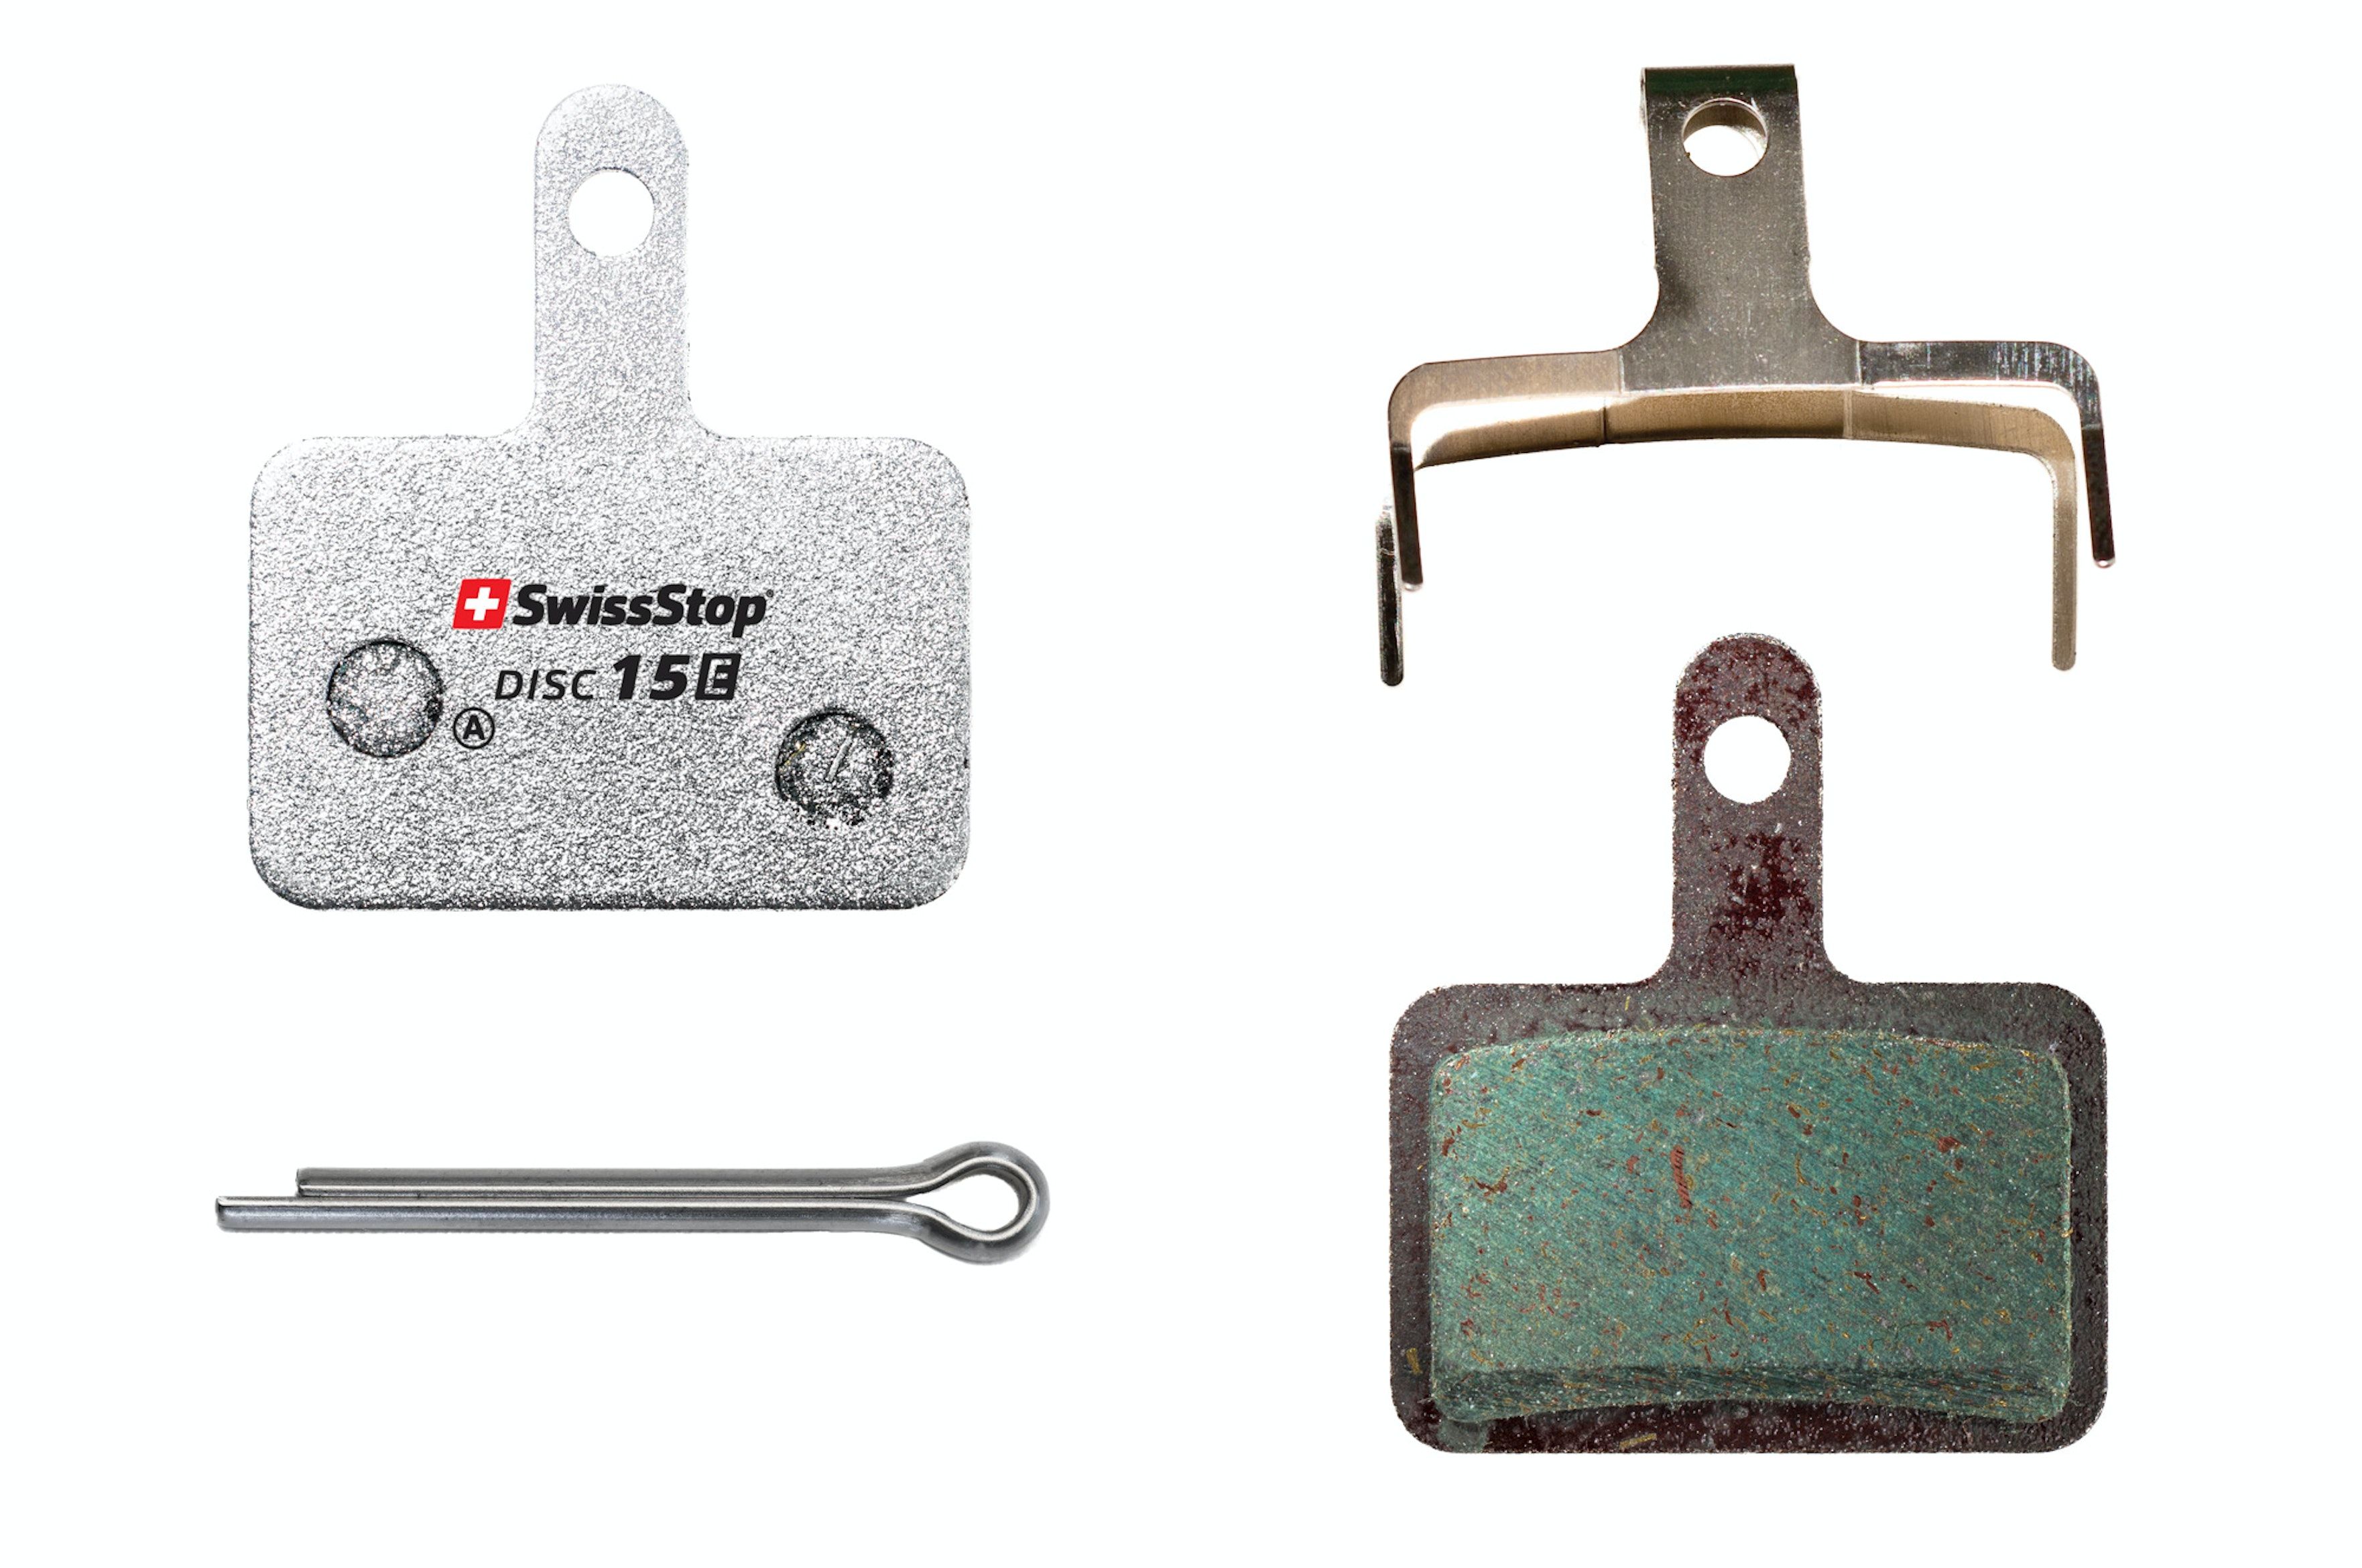 E-bike-specific brake pads are available for many commonly used disc brakes.